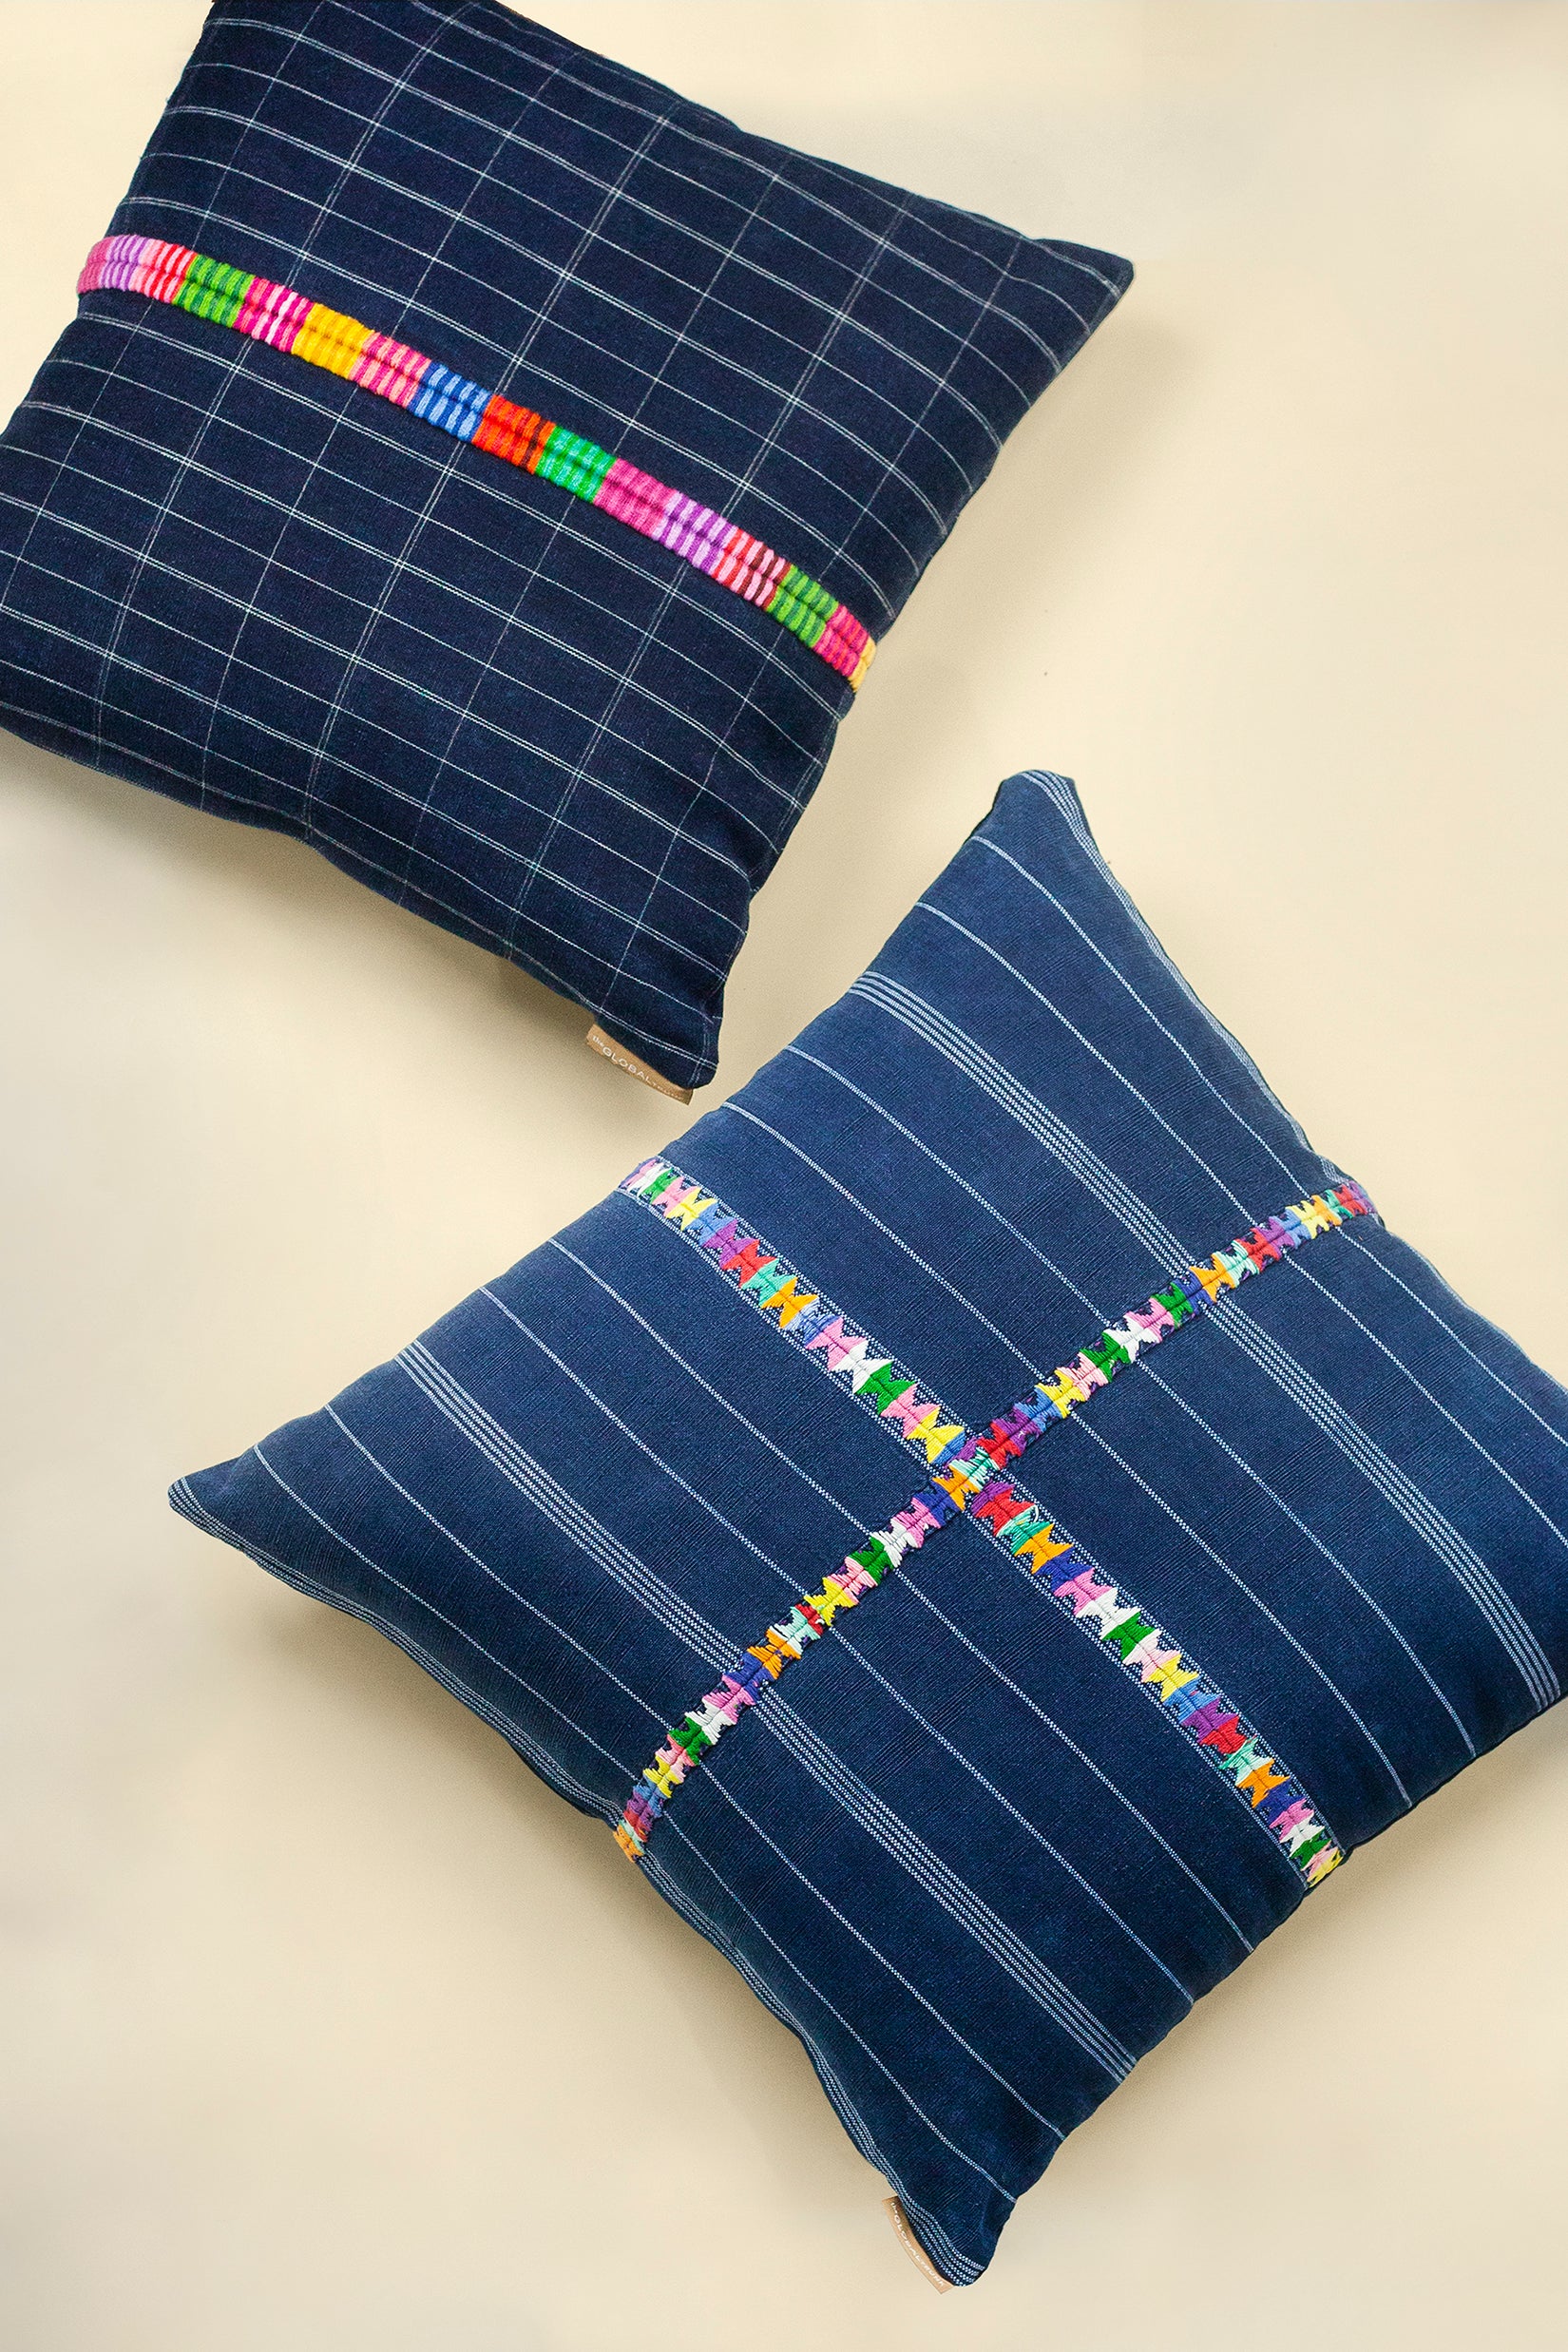 A pair of square pillows in different shades of navy with white geometric lines and a colorful geometric embroidered seam running across